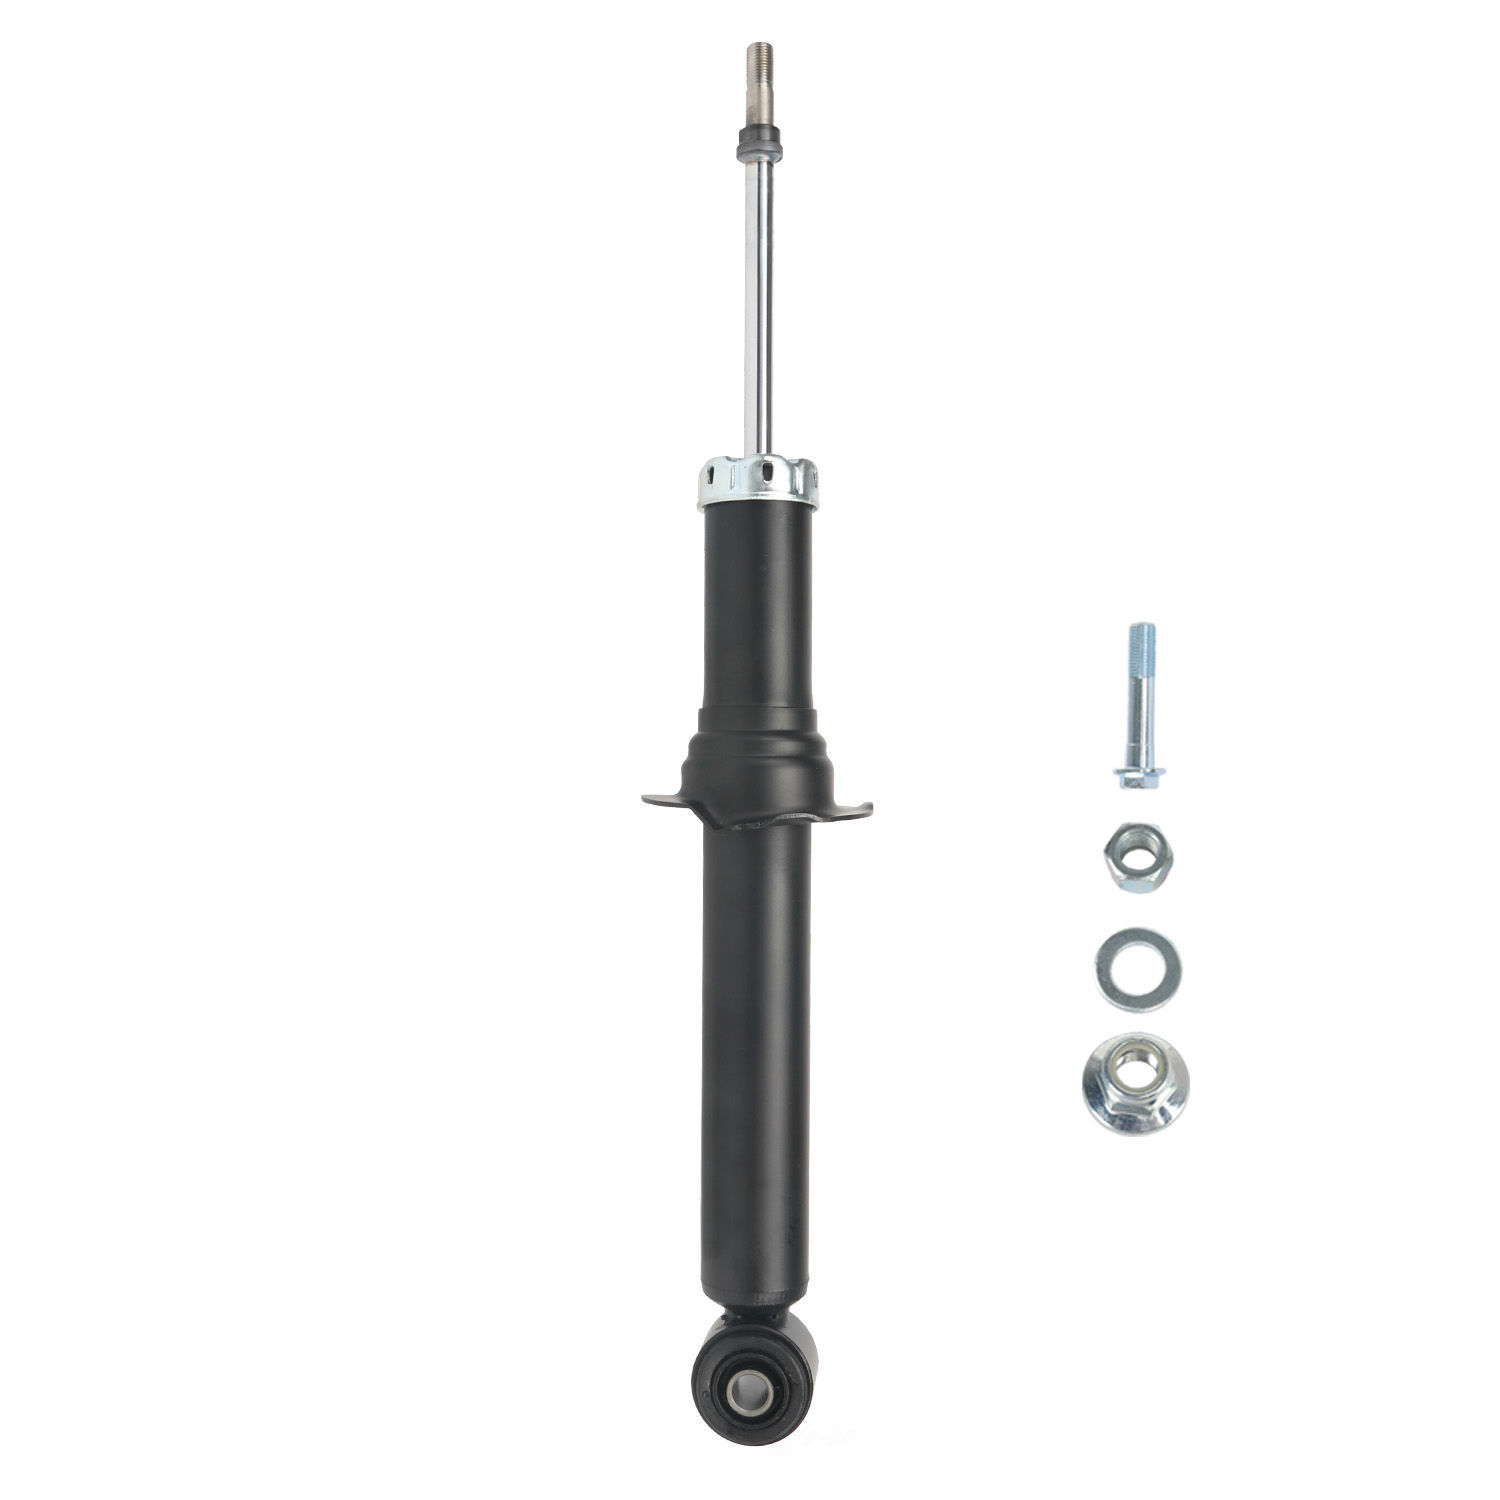 PERFORMANCE RIDE TECHNOLOGY BY ADD - Suspension Strut Assembly - P6T 372003